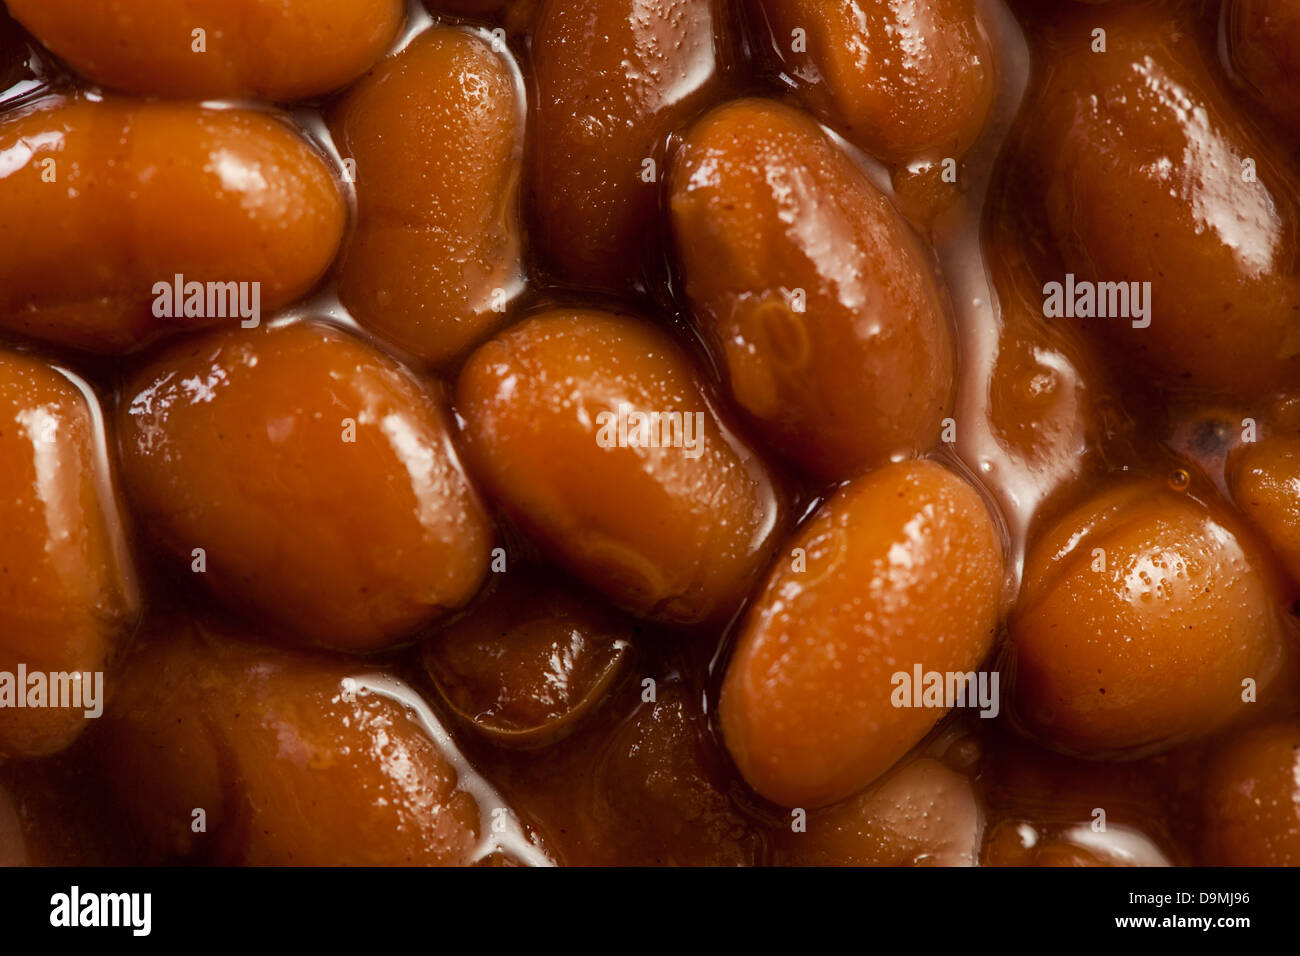 Homemade Barbecue Baked Beans with pork in a bowl Stock Photo